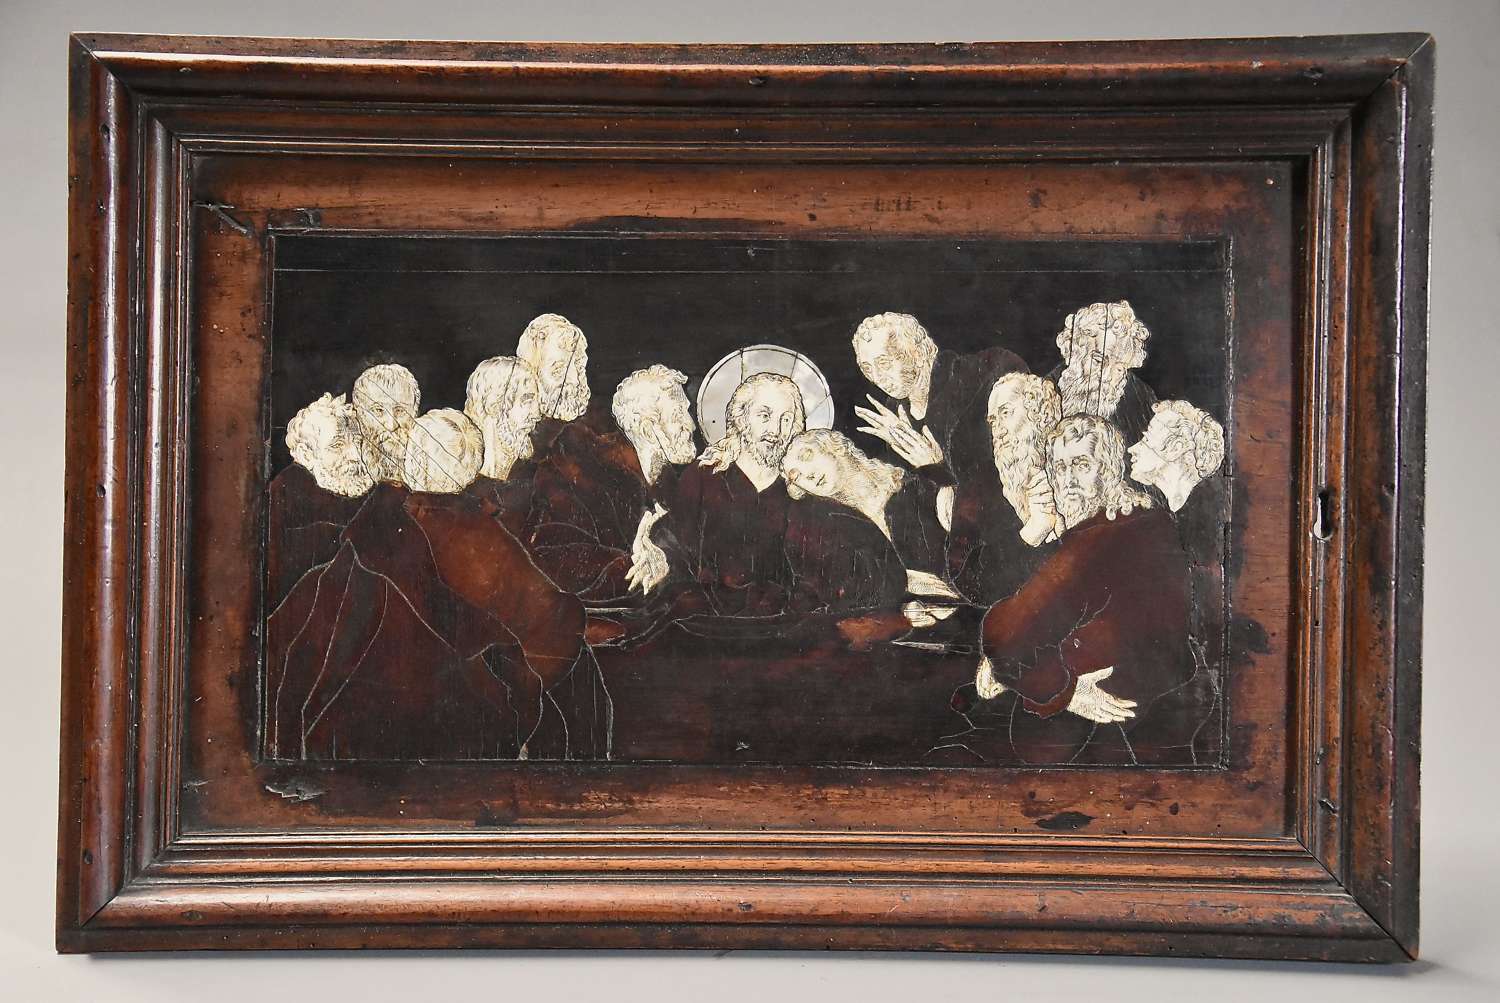 Rare Continental early 17thc walnut panel depicting ‘The Last Supper'